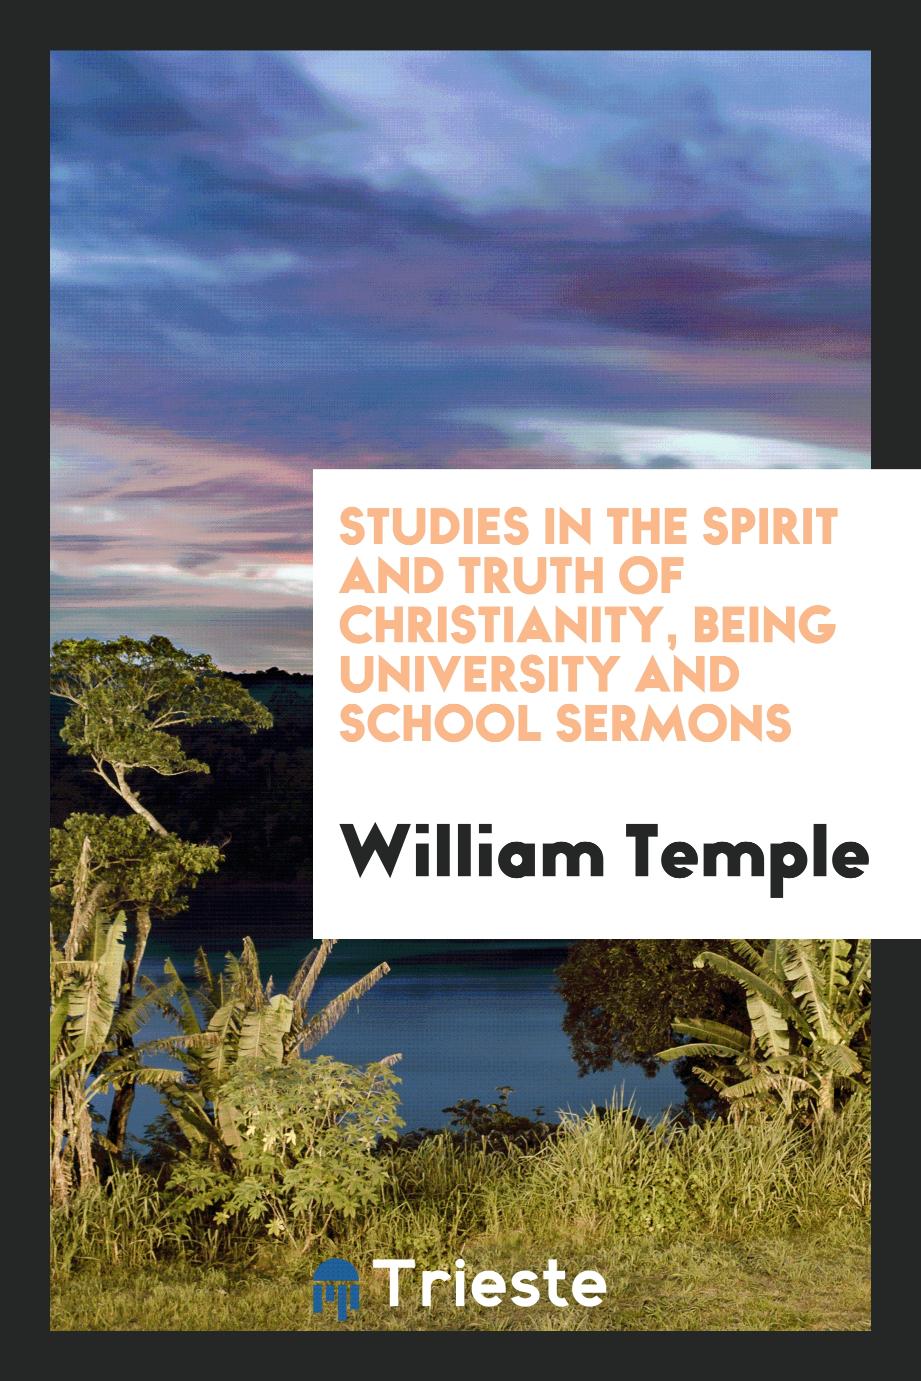 Studies in the Spirit and Truth of Christianity, Being University and School Sermons